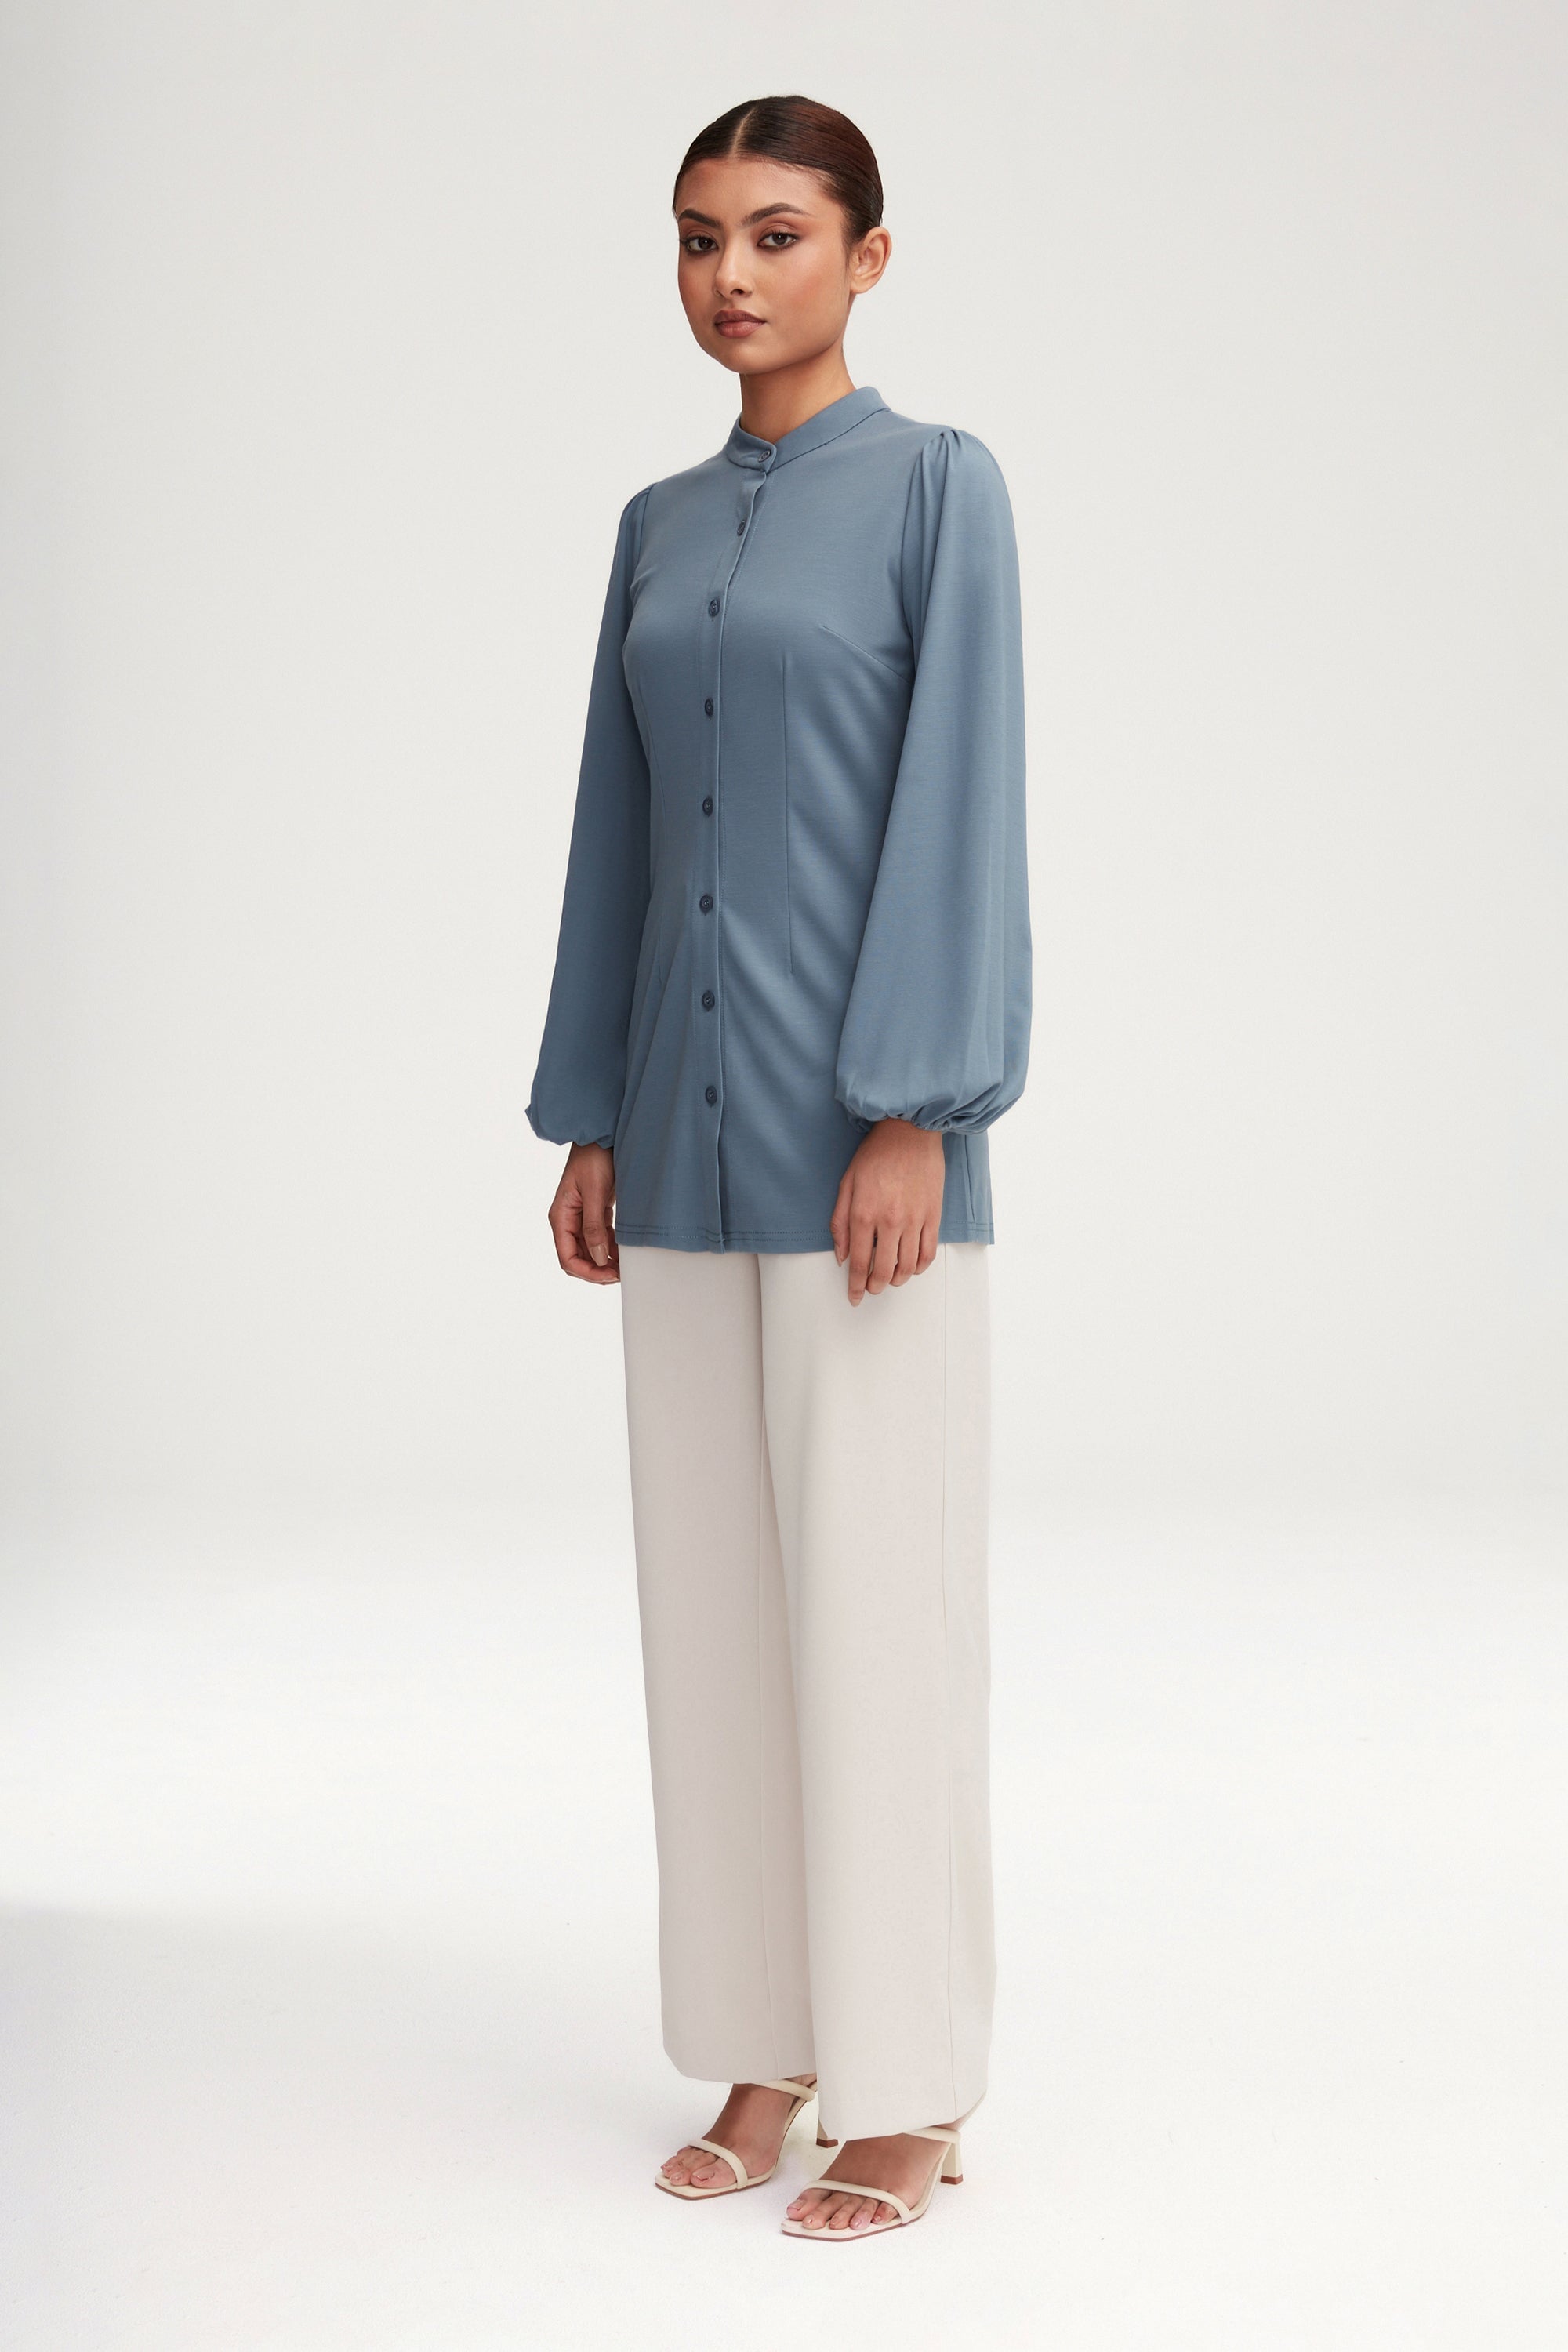 Rayana Jersey Button Down Top - Denim Blue Clothing Veiled 